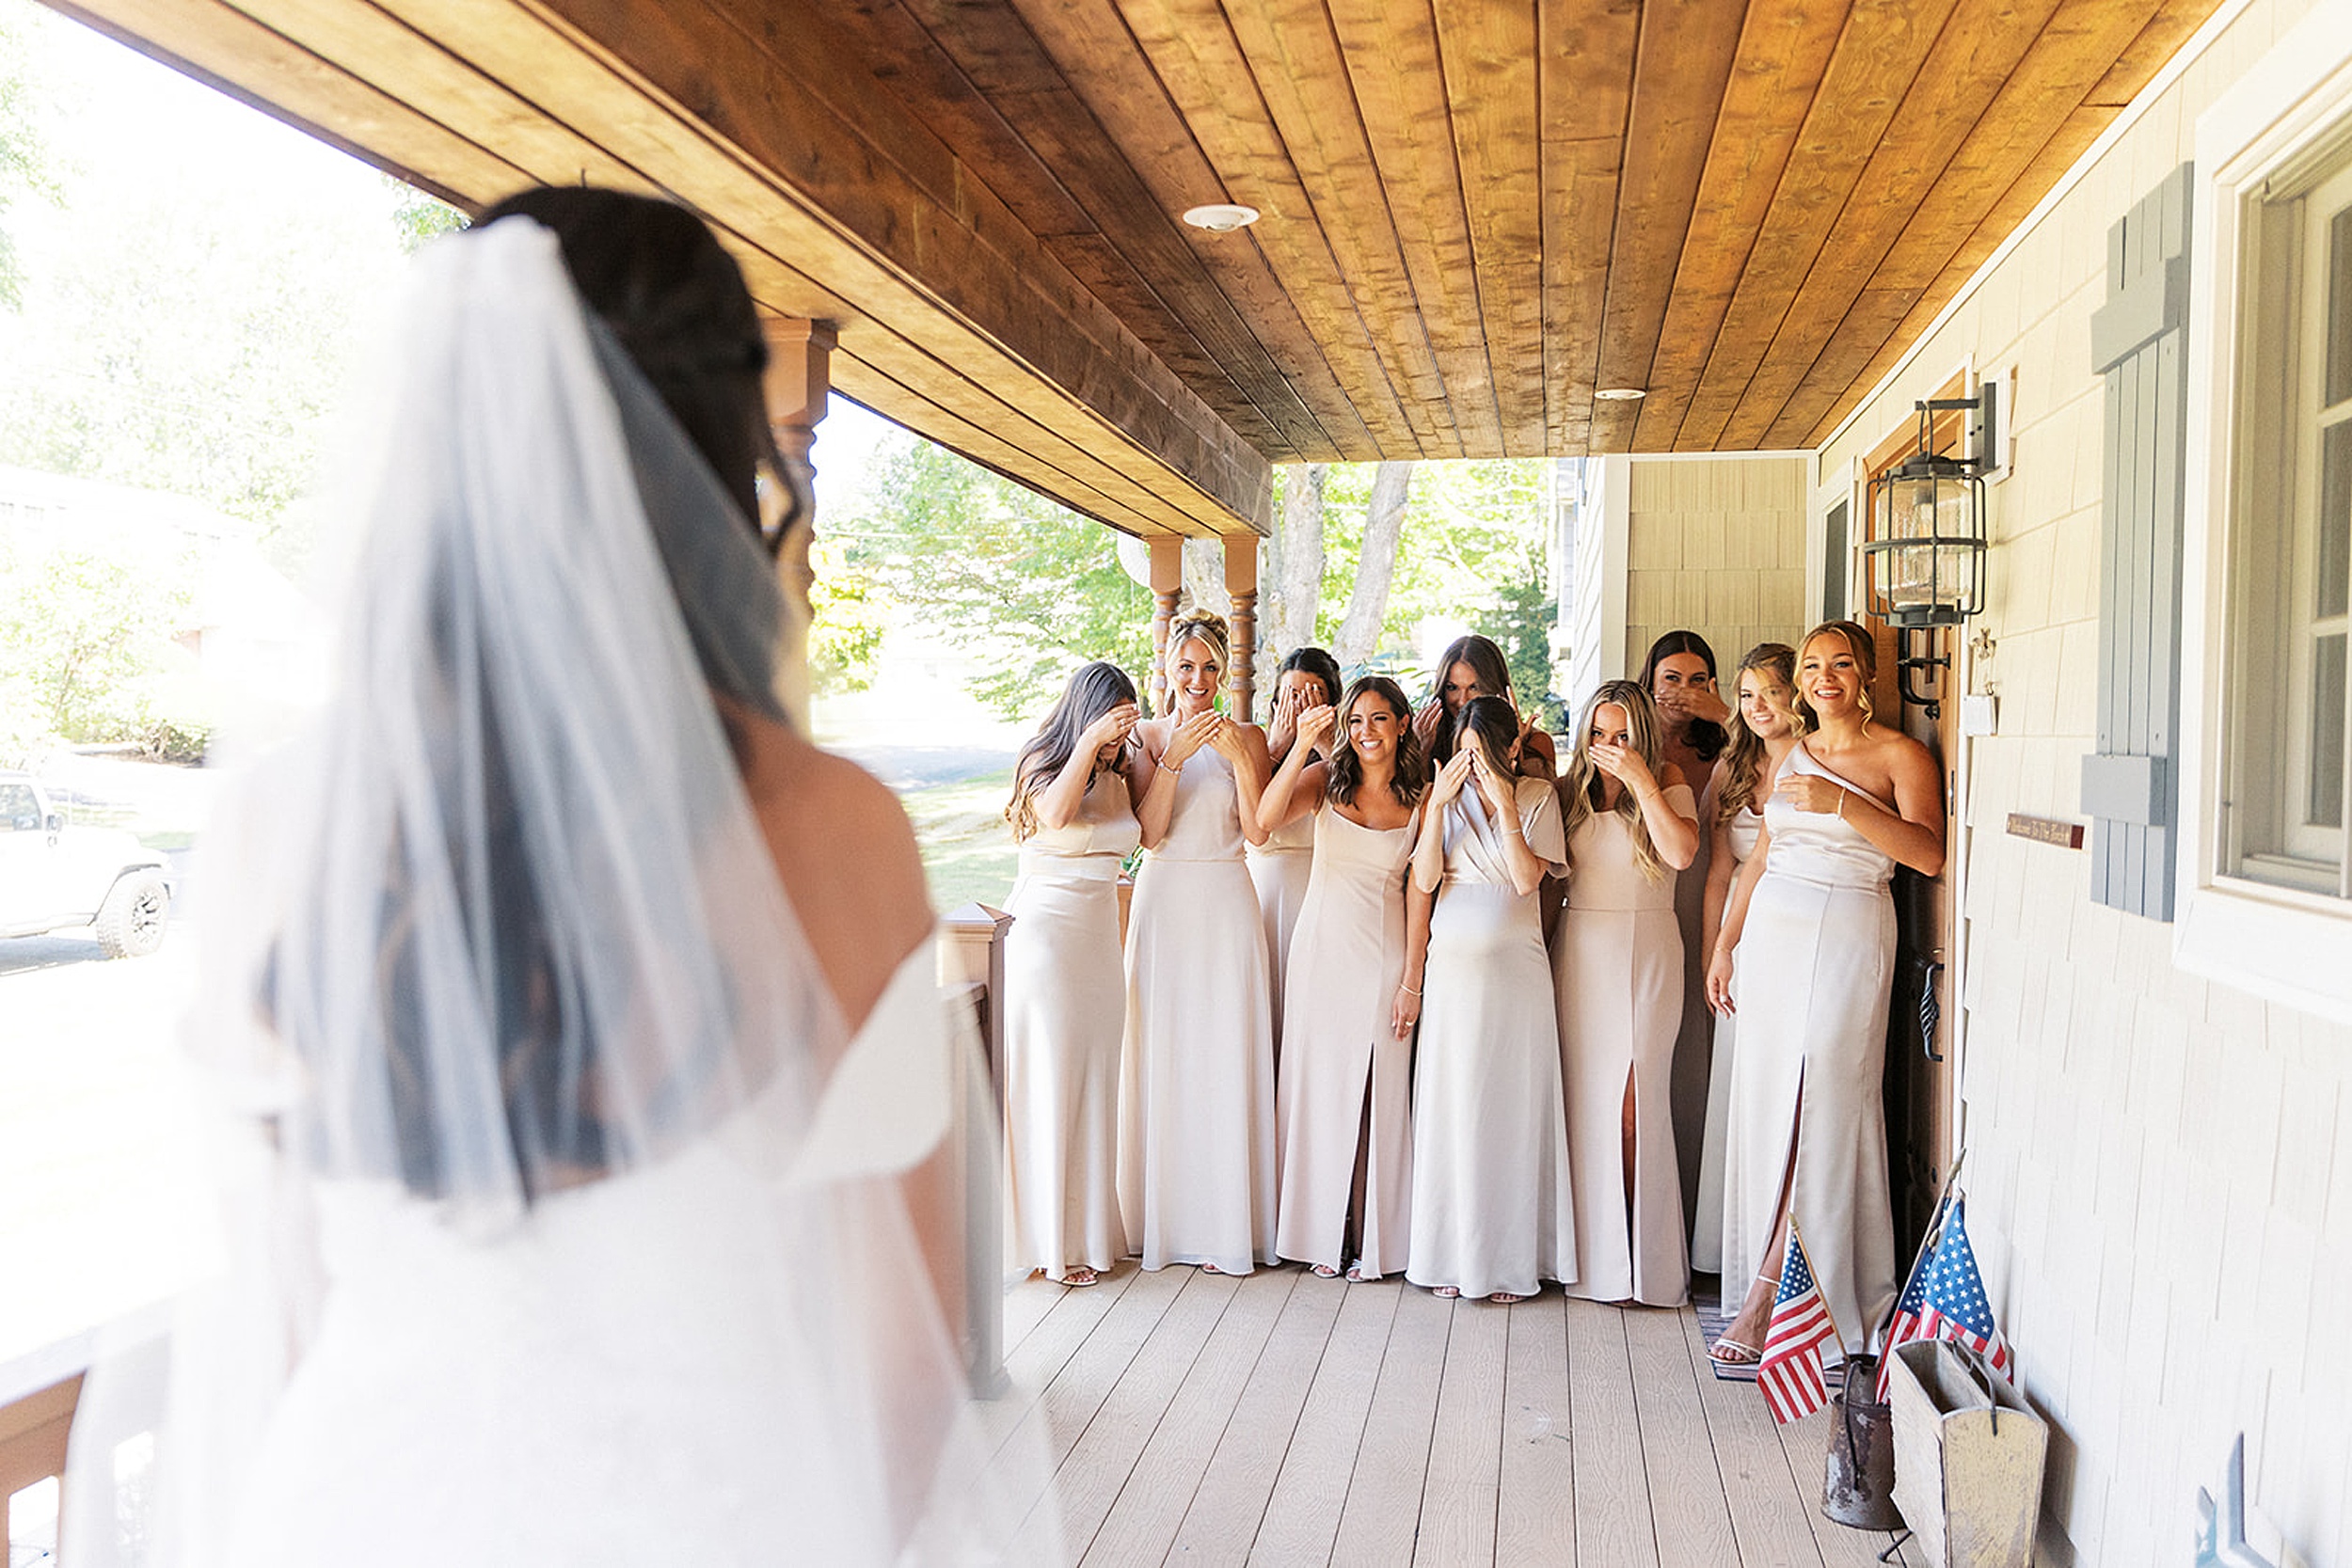 A bride stands on a porch while her bridesmaids see her for the first time and cheer for her